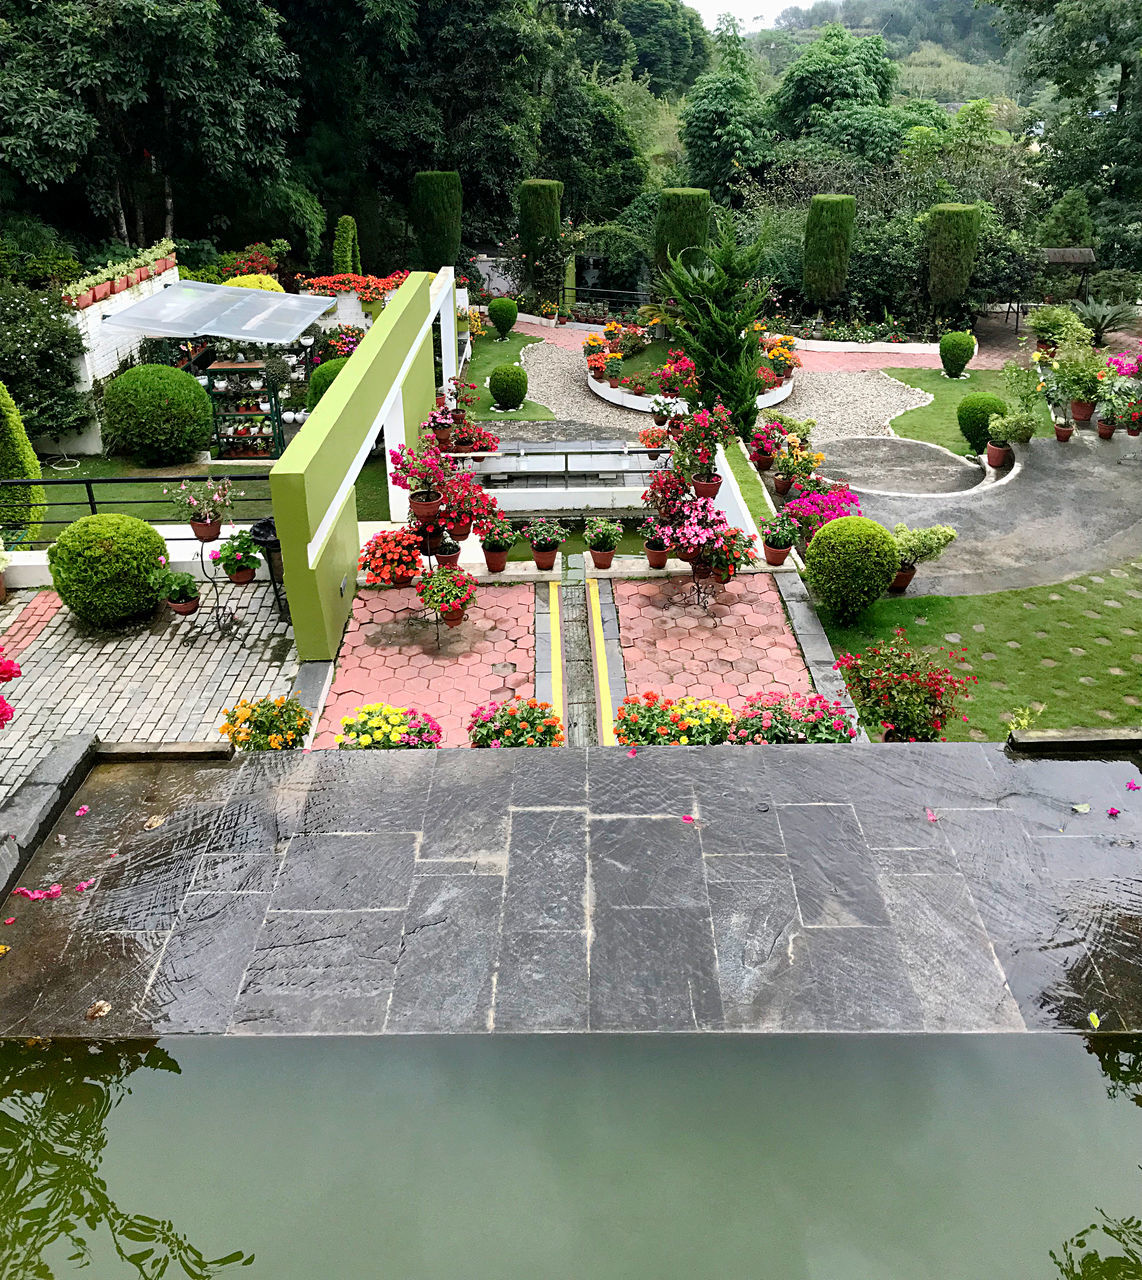 plant, tree, garden, nature, backyard, water, flower, flowering plant, day, architecture, growth, ornamental garden, formal garden, pond, no people, outdoors, lawn, green, yard, fountain, beauty in nature, built structure, botanical garden, park